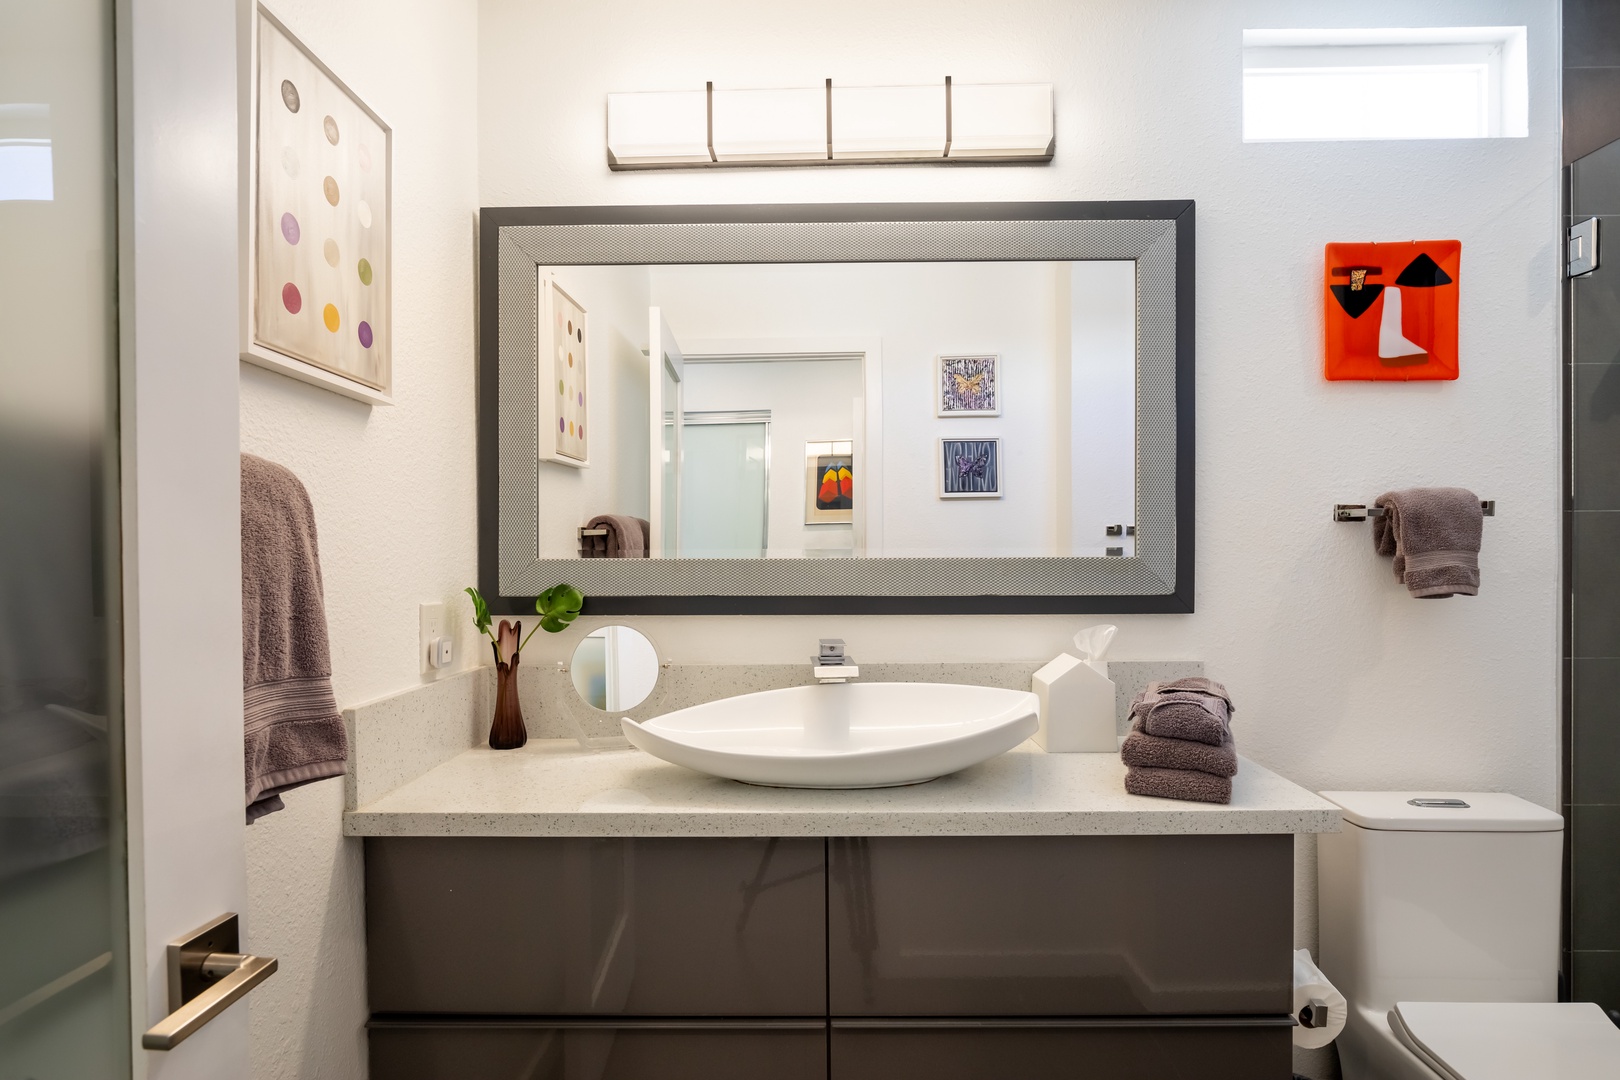 The polished primary king en suite boasts an oversized vanity & spa-like rain shower